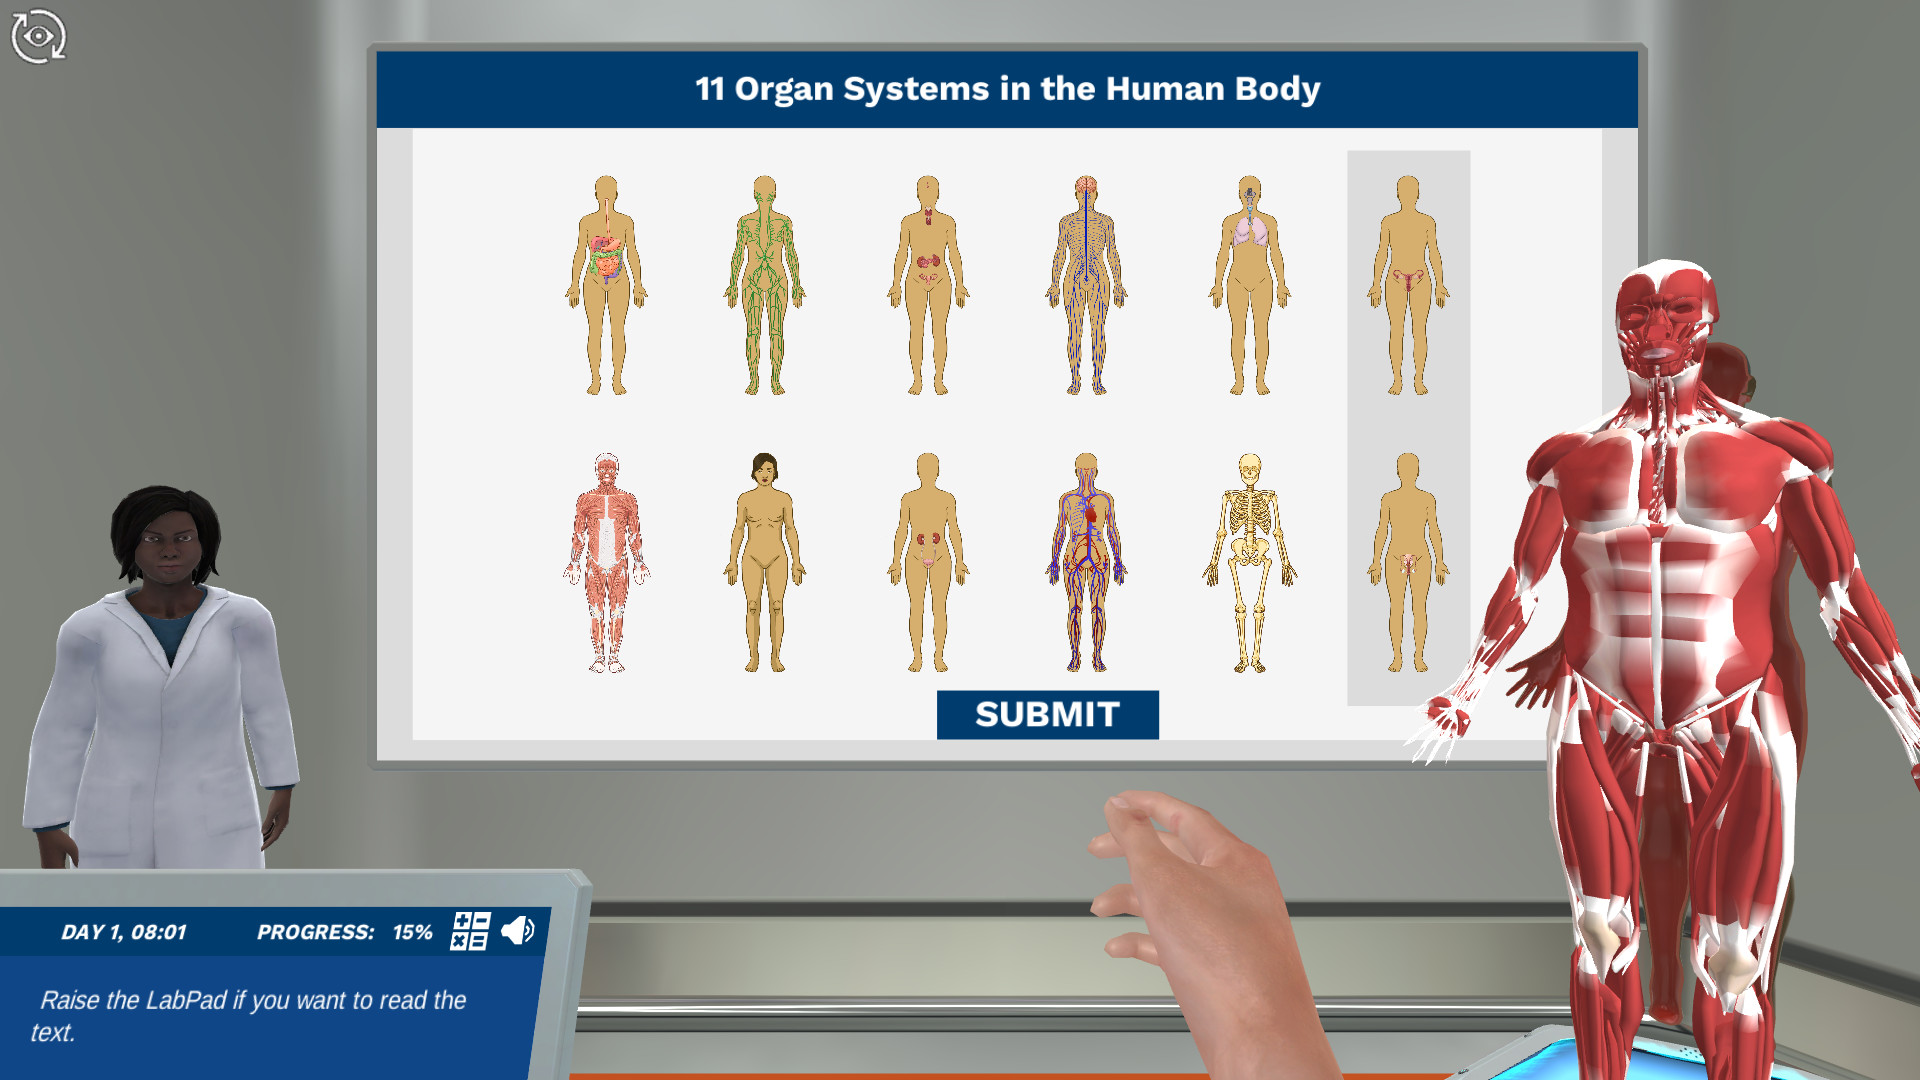 Body Structure and Organization: Help identify a potentially failing organ system